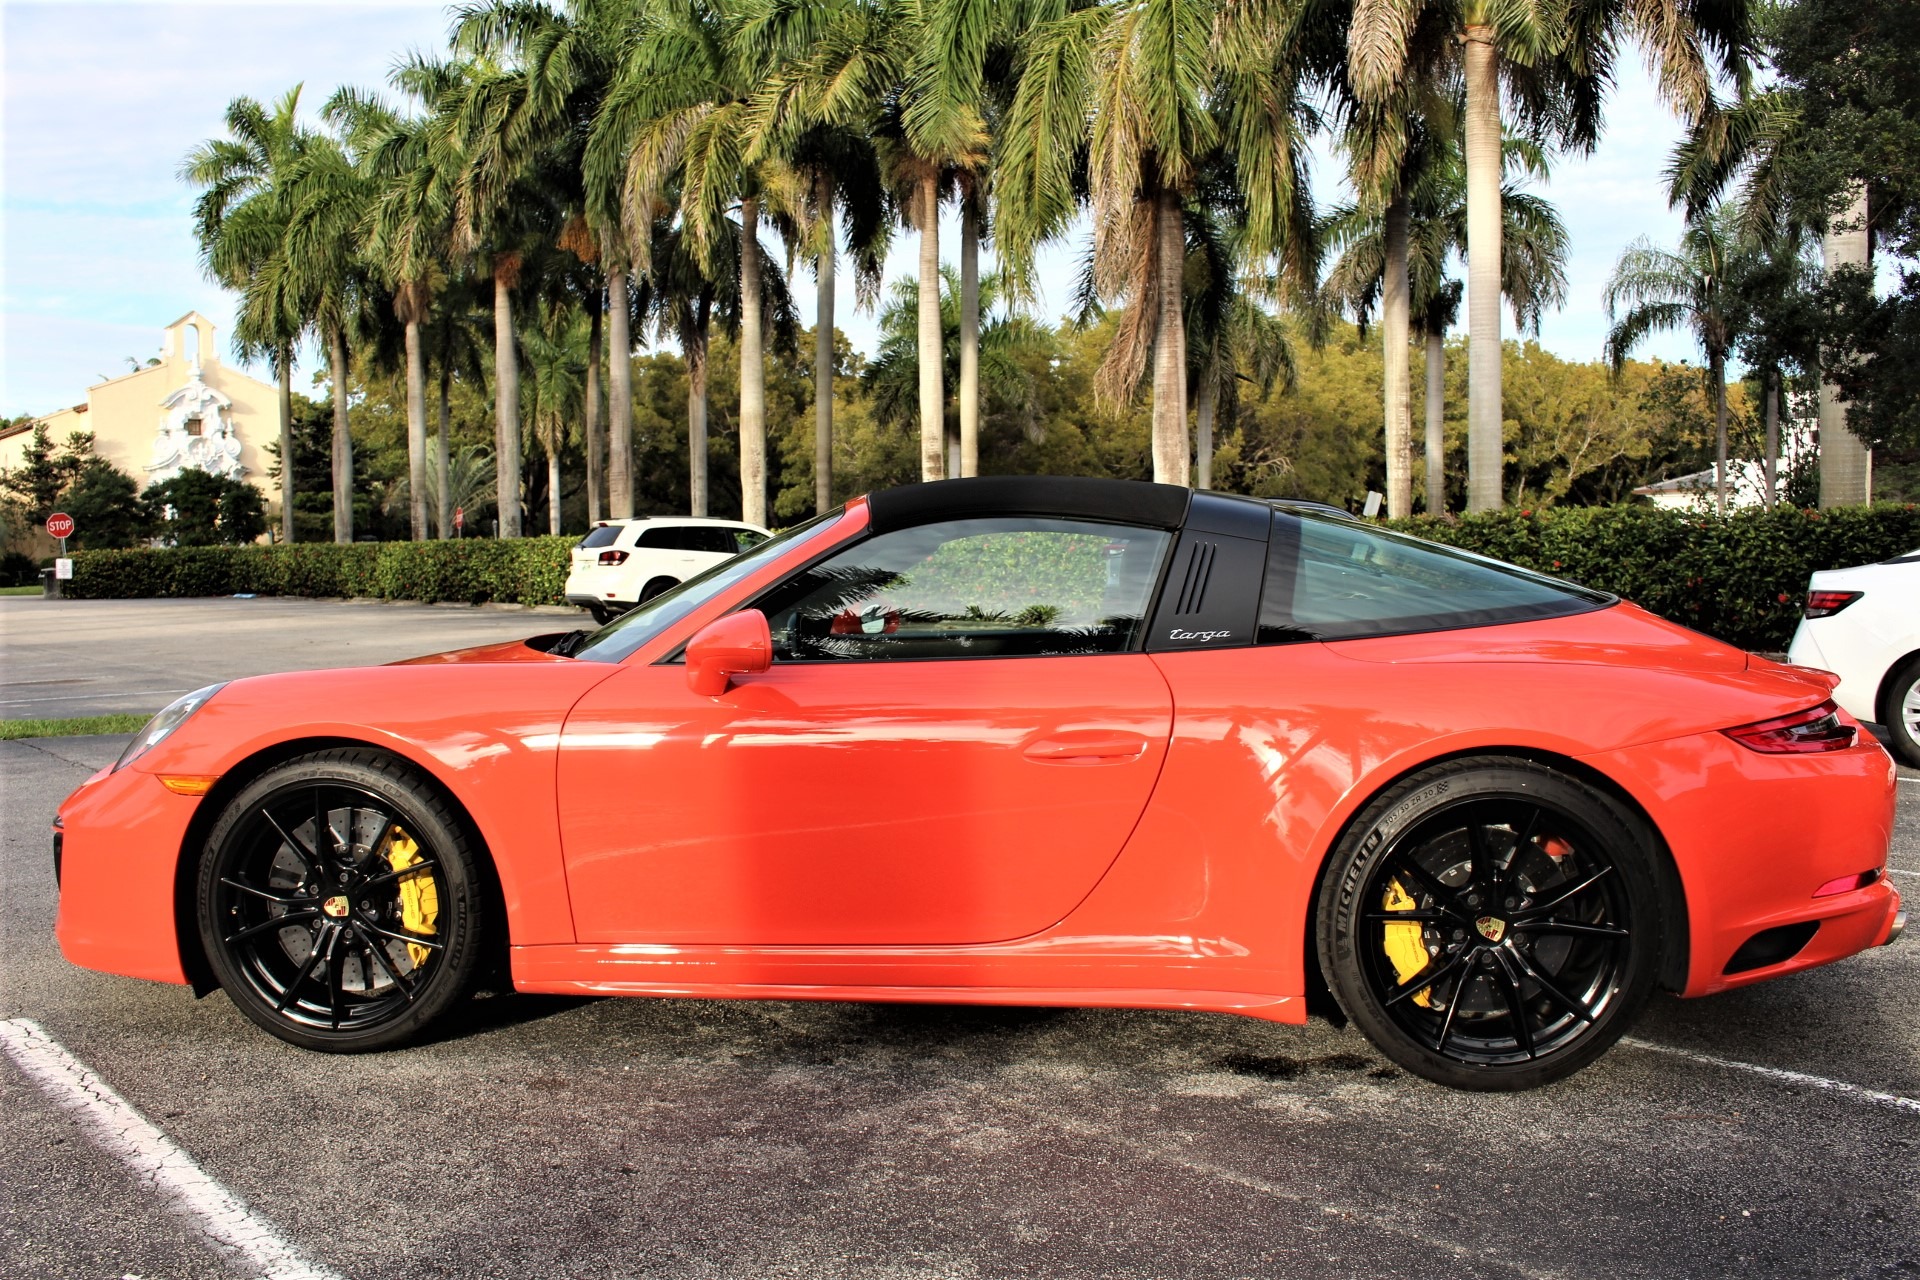 Used 2018 Porsche 911 Targa 4S for sale Sold at The Gables Sports Cars in Miami FL 33146 3